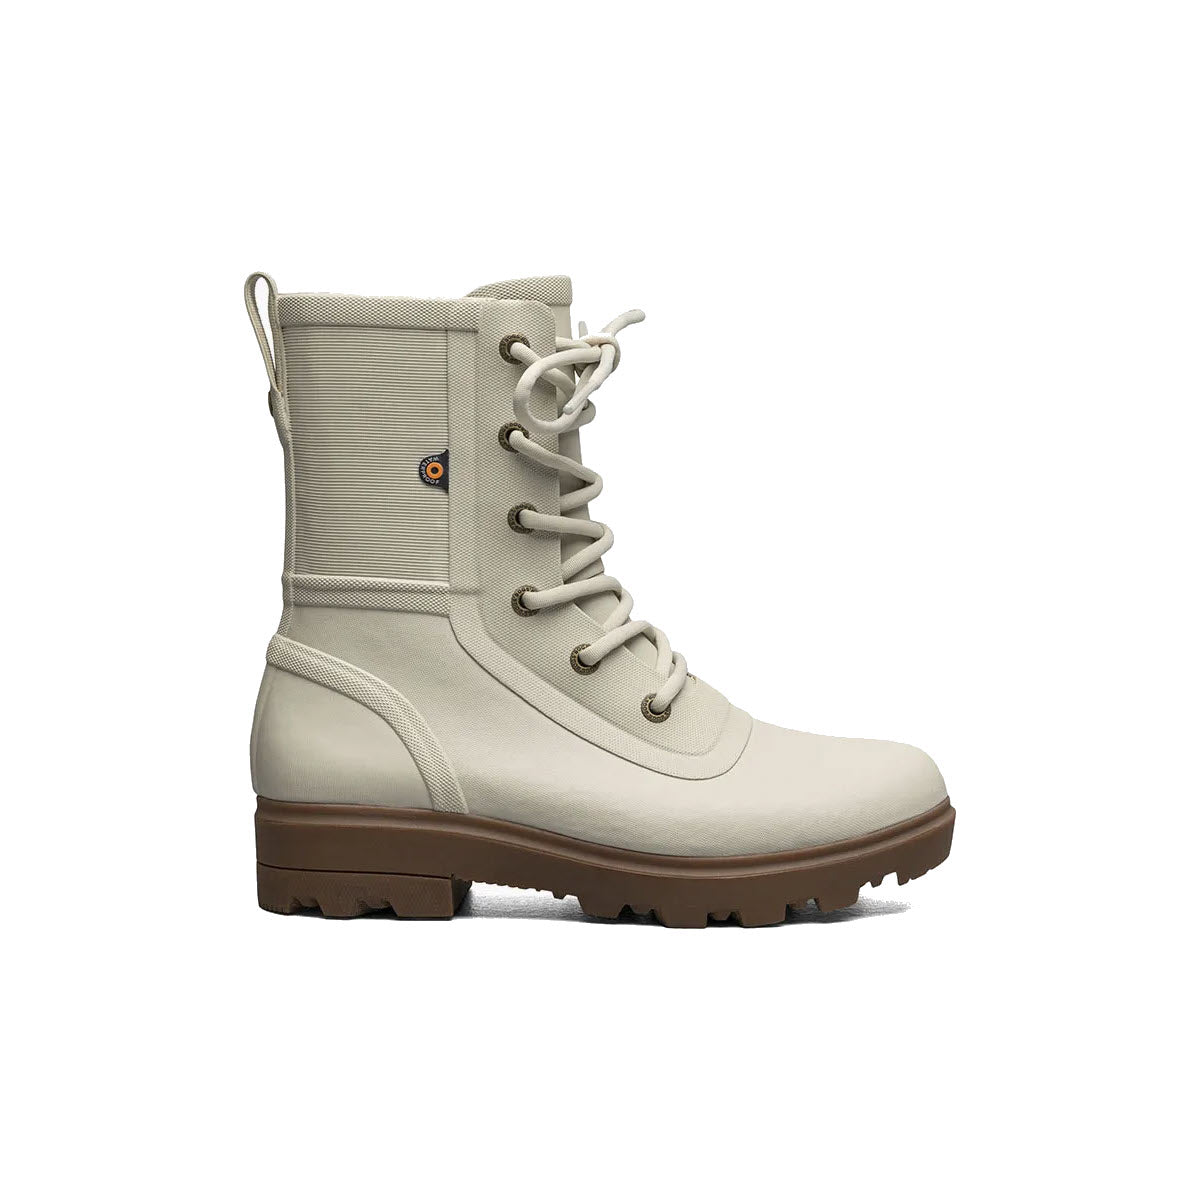 A light beige waterproof BOGS HOLLY RAIN LACE TALL OATMEAL boot with laces and a small orange logo on the side, set against a plain white background.